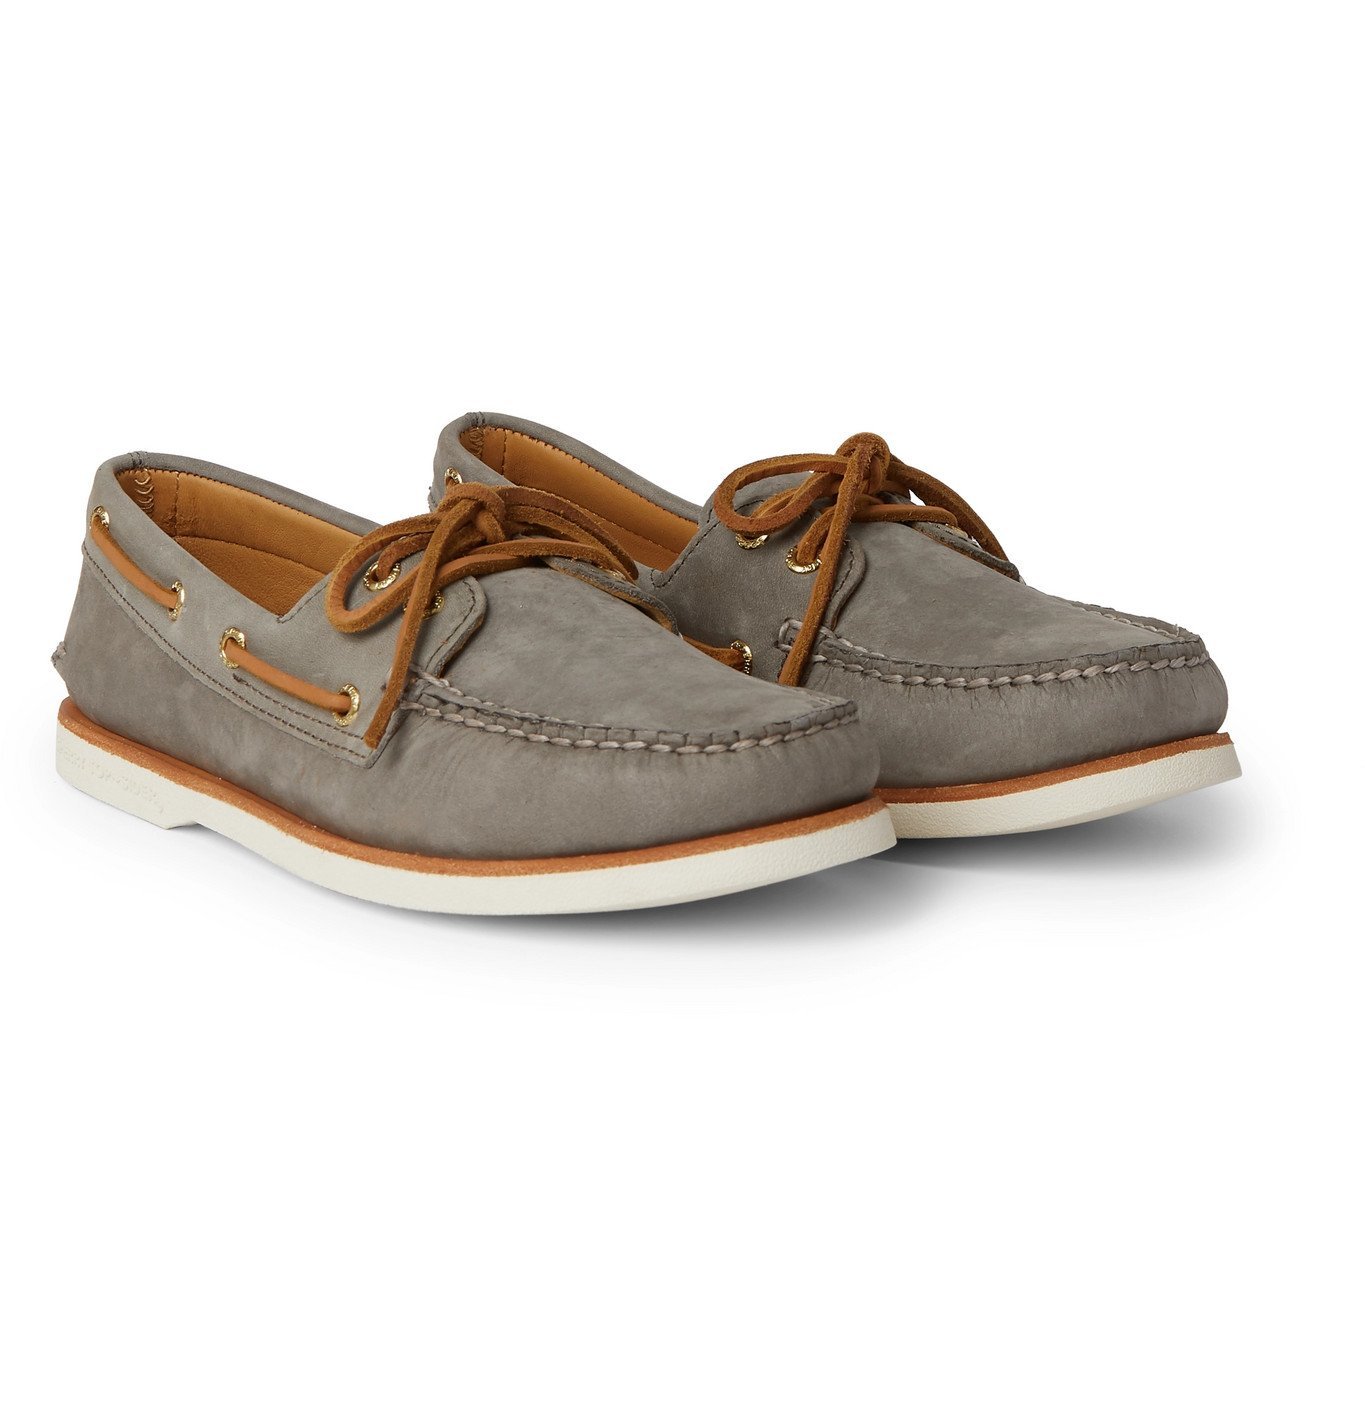 Sperry - Authentic Original Leather Boat Shoes - Gray Sperry Topsider